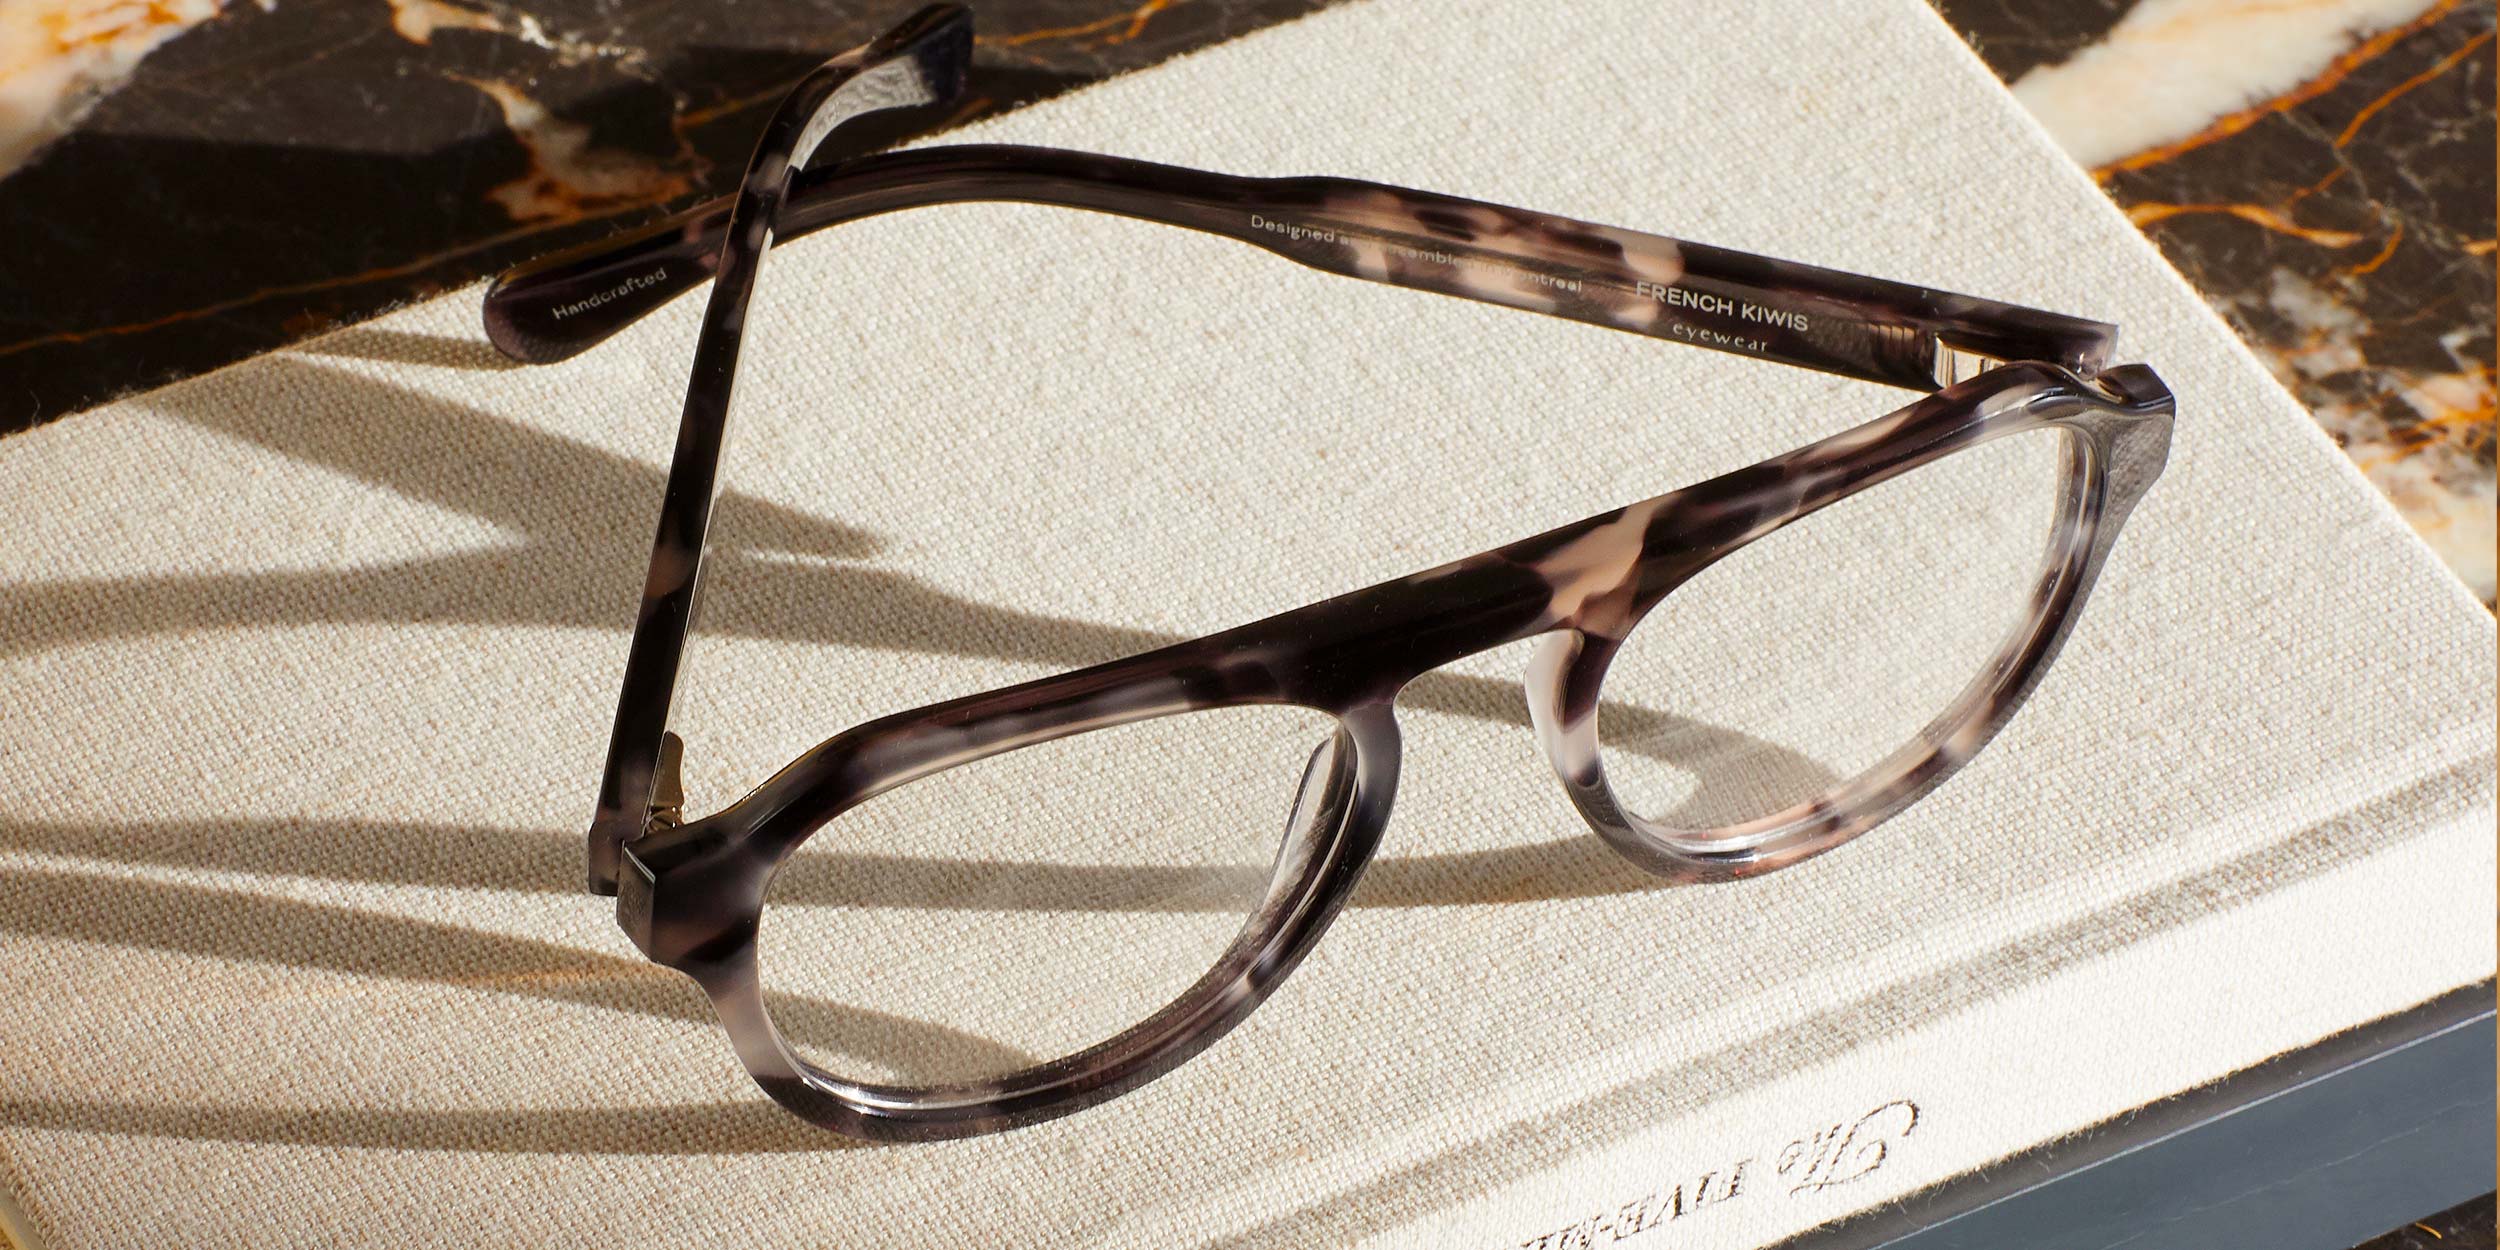 Photo Details of Romain Grey Marble Reading Glasses in a room